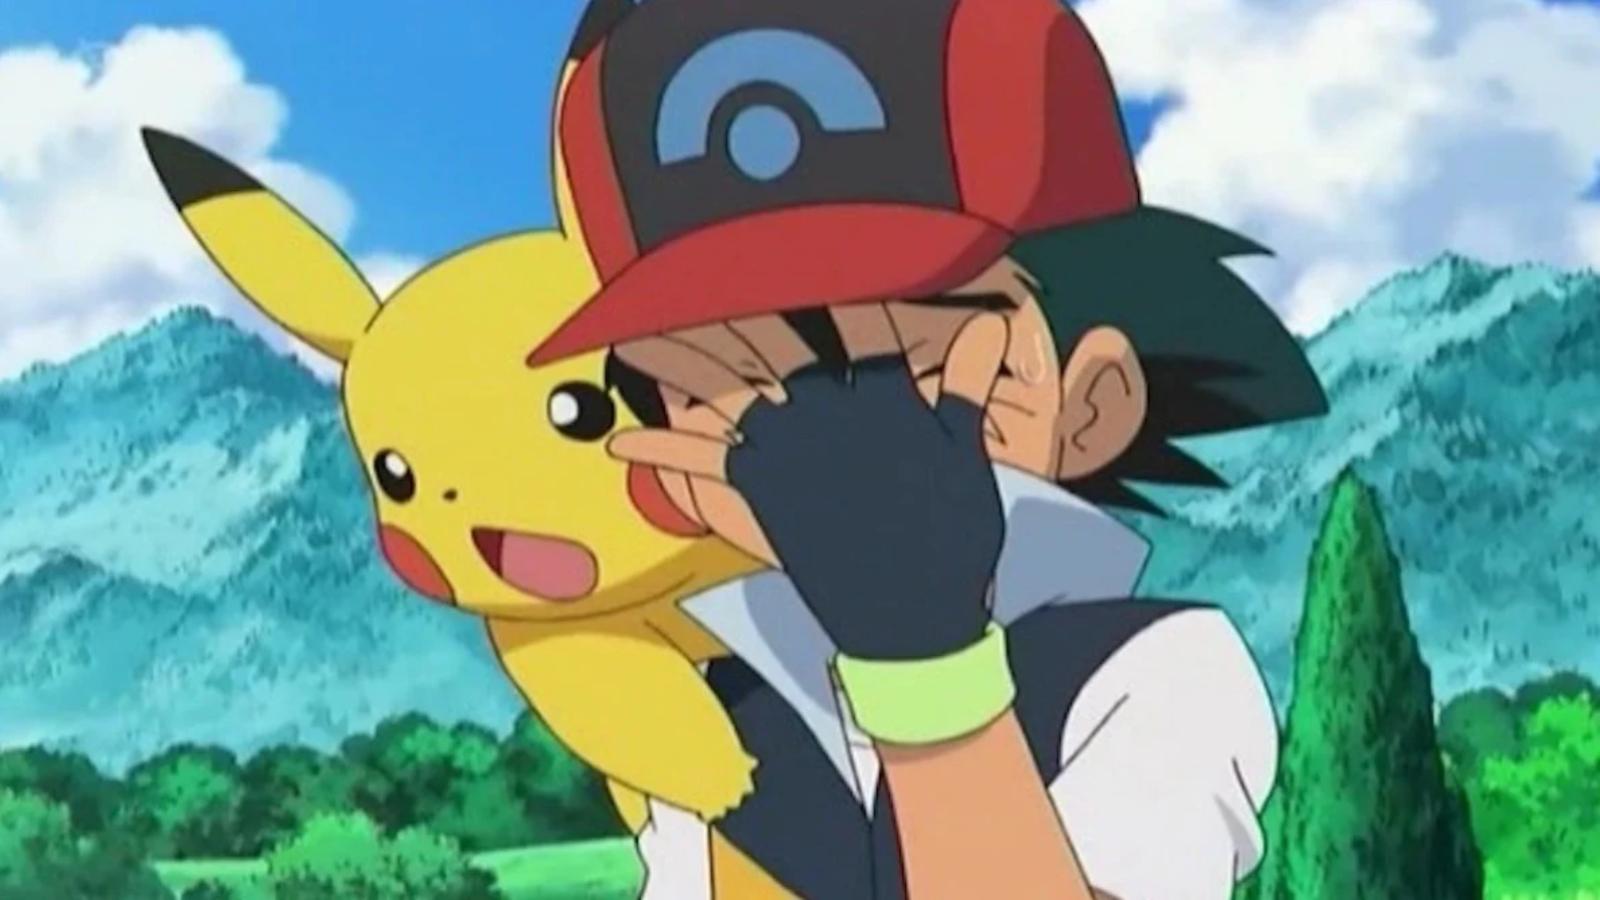 Ash facepalming with Pikachu on his shoulder